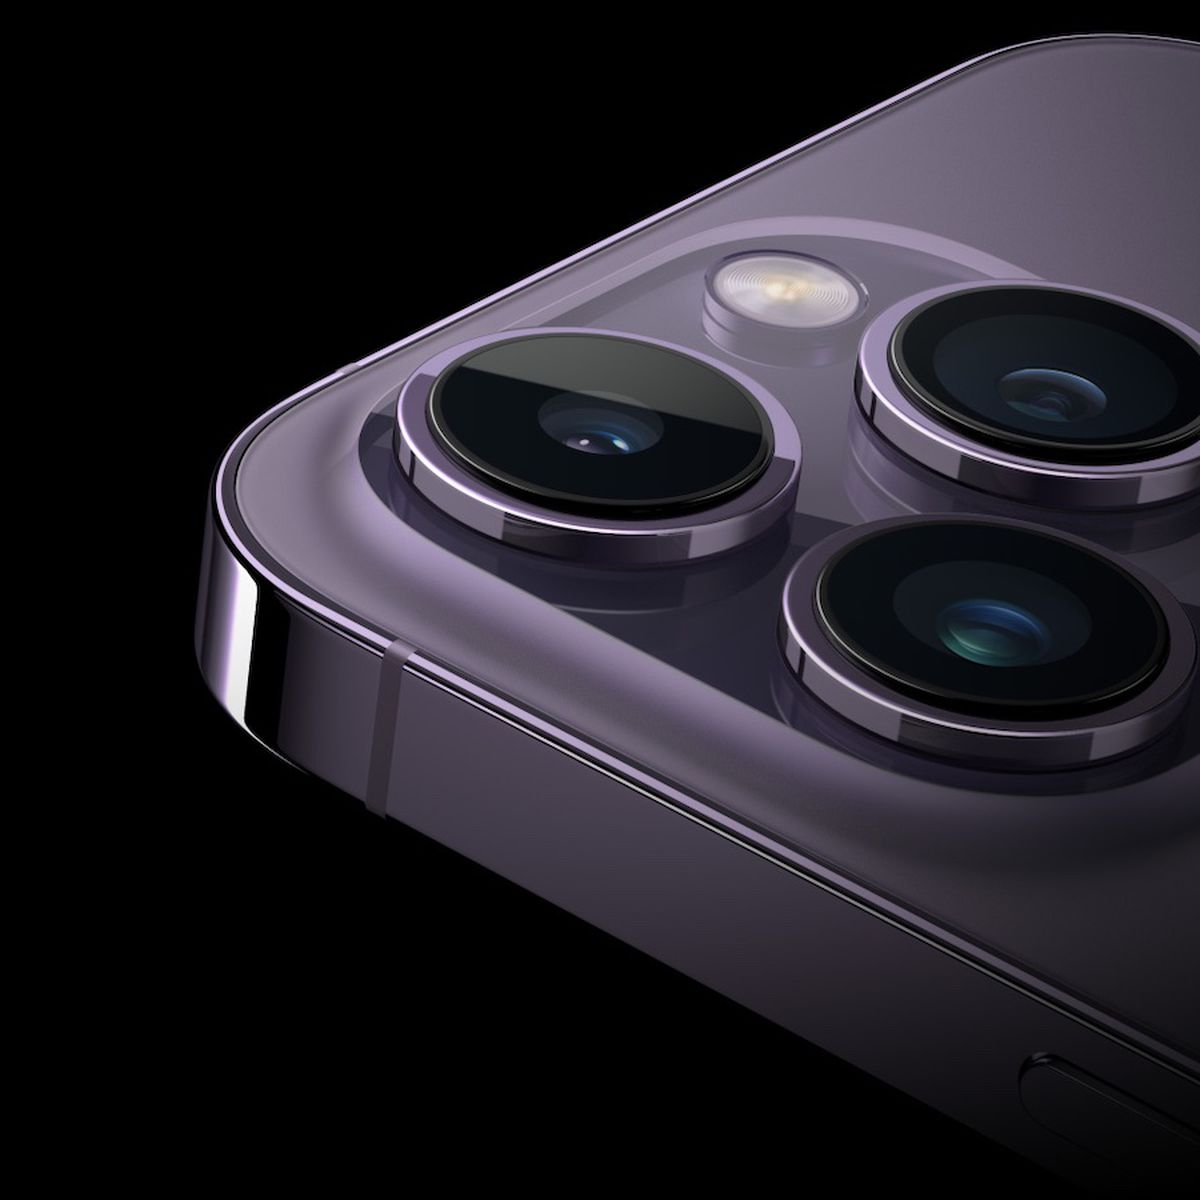 iPhone 15 Ultra and 16 Ultra will launch with periscope telephoto